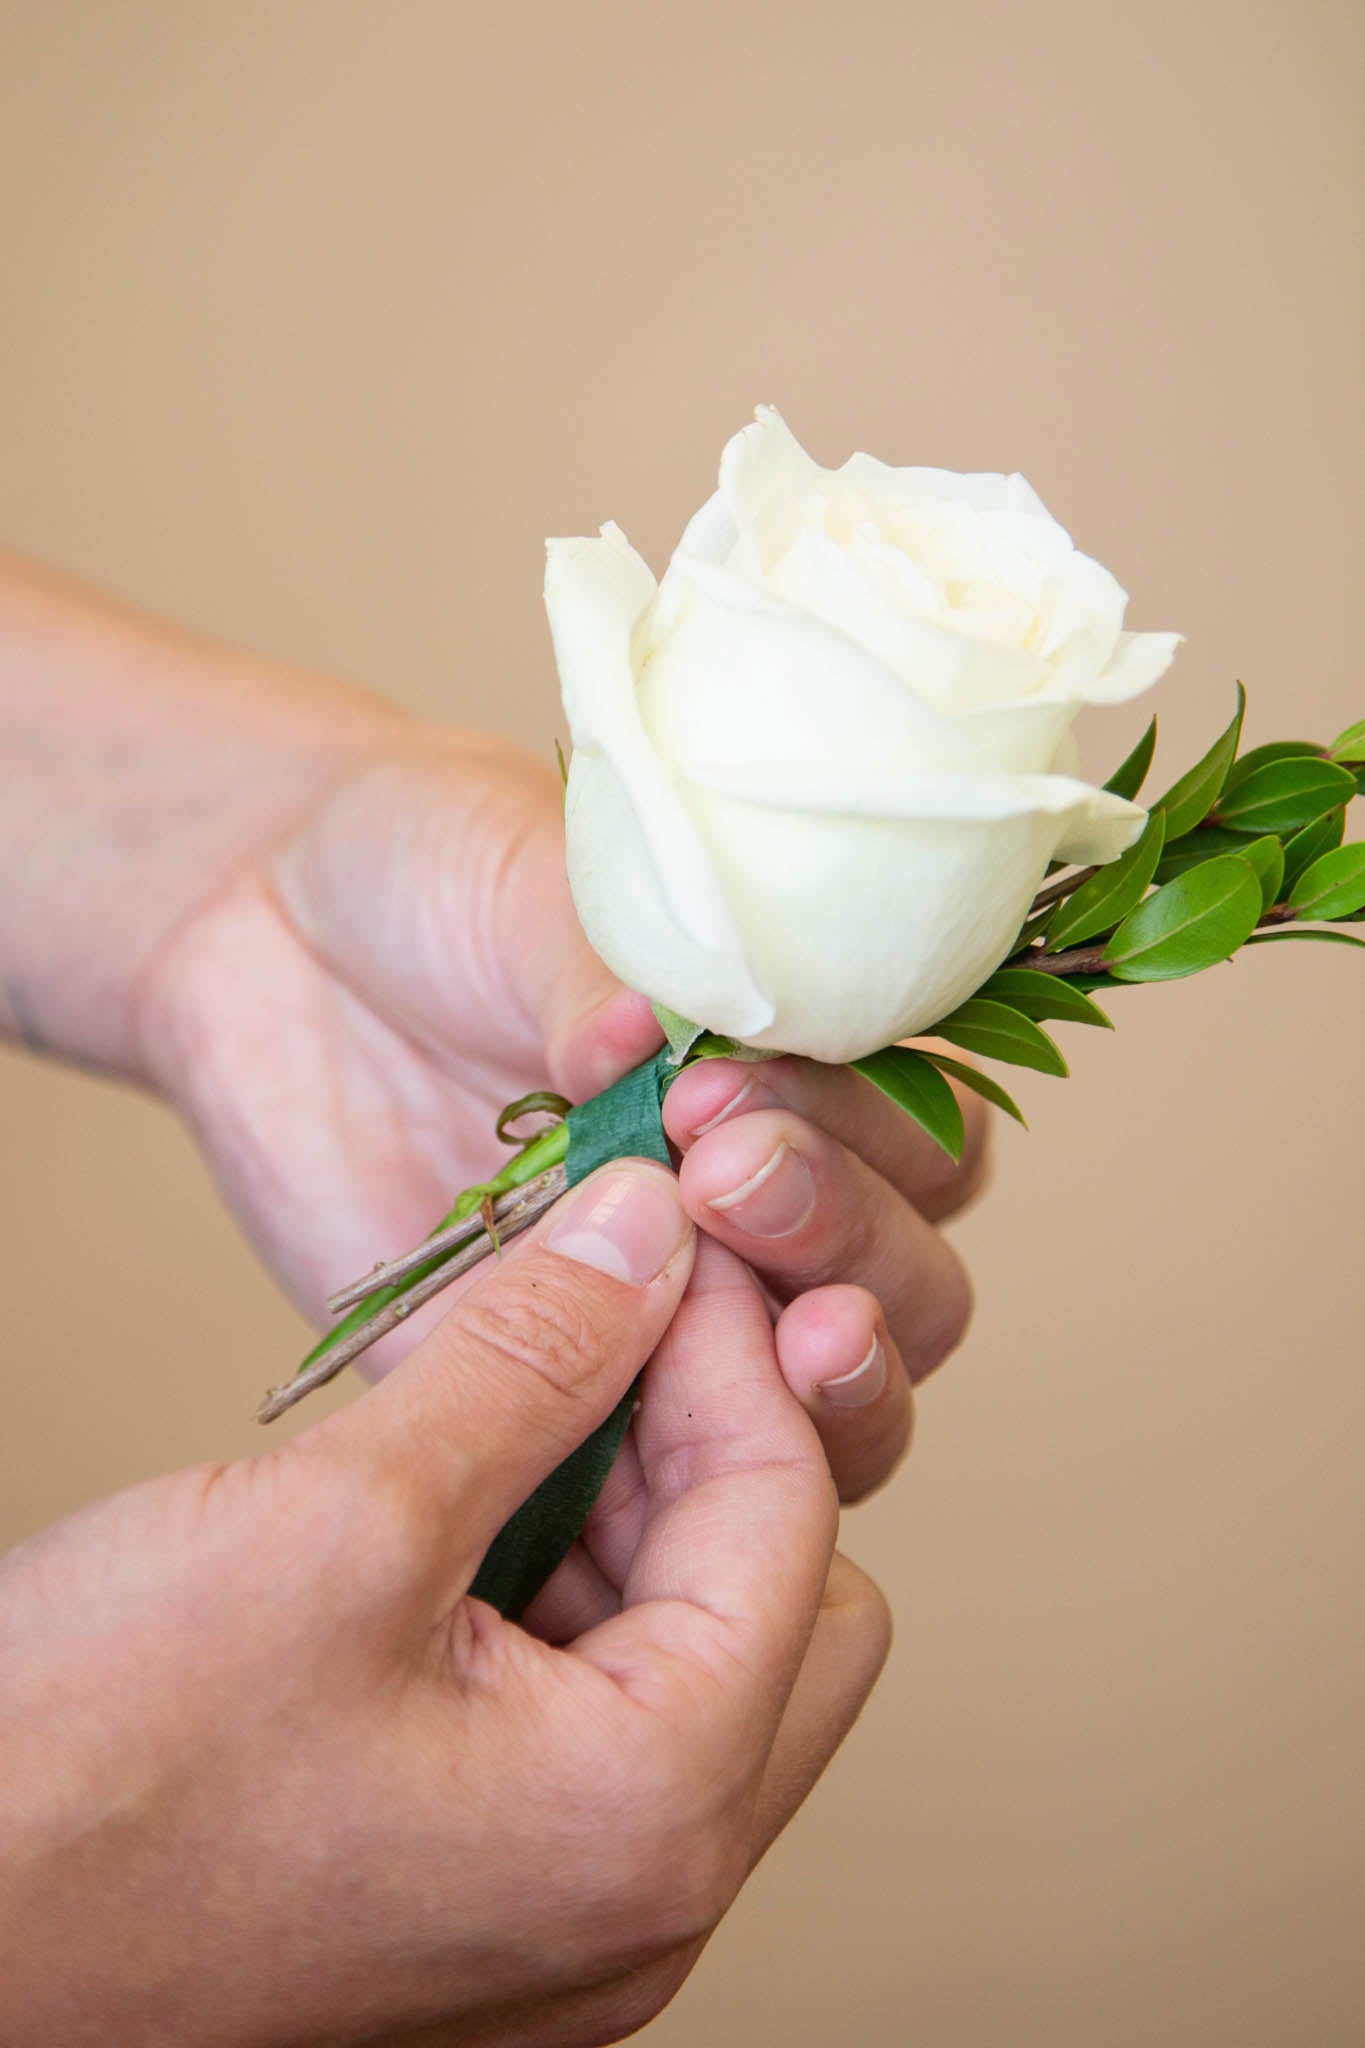 Learn How to Make a Corsage with Floral Glue! Easy Flower Tutorials